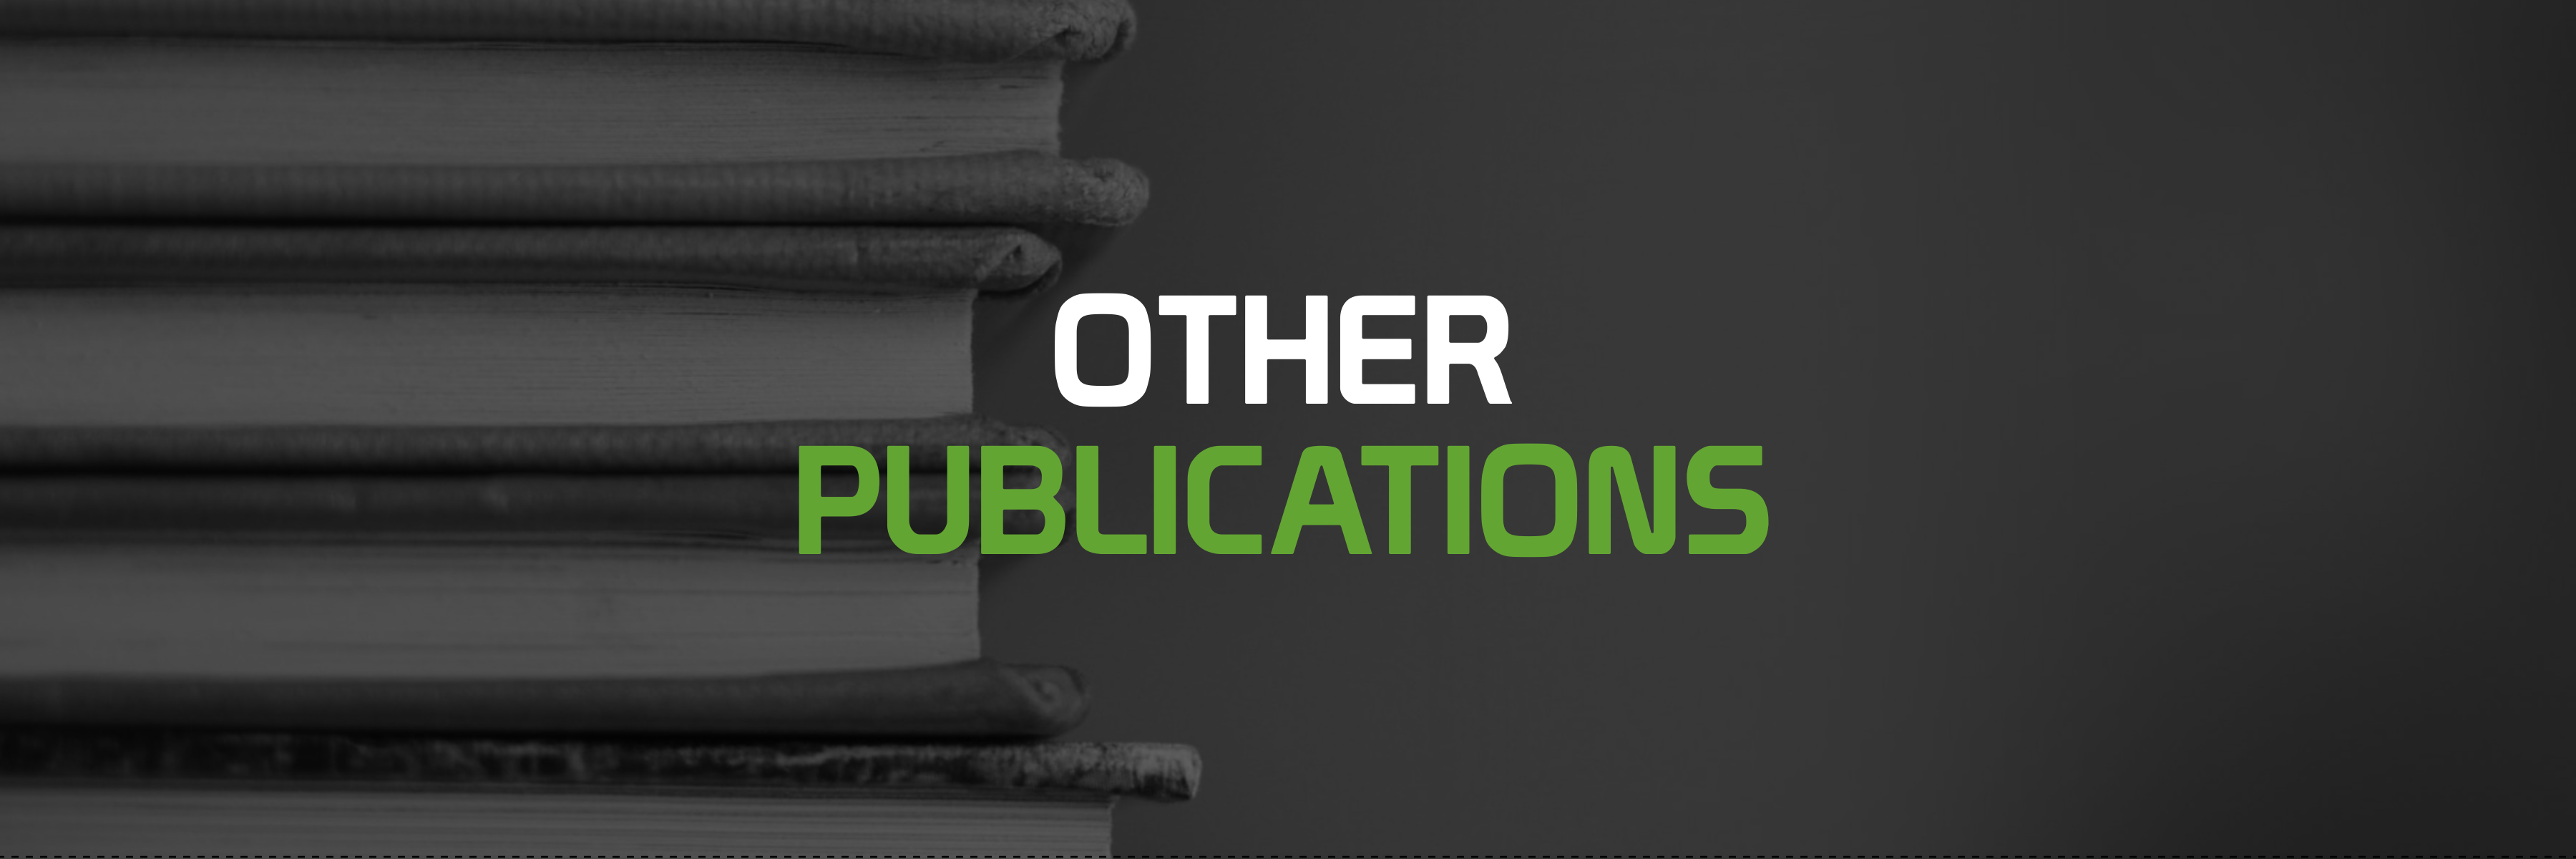 Other Publications Banner